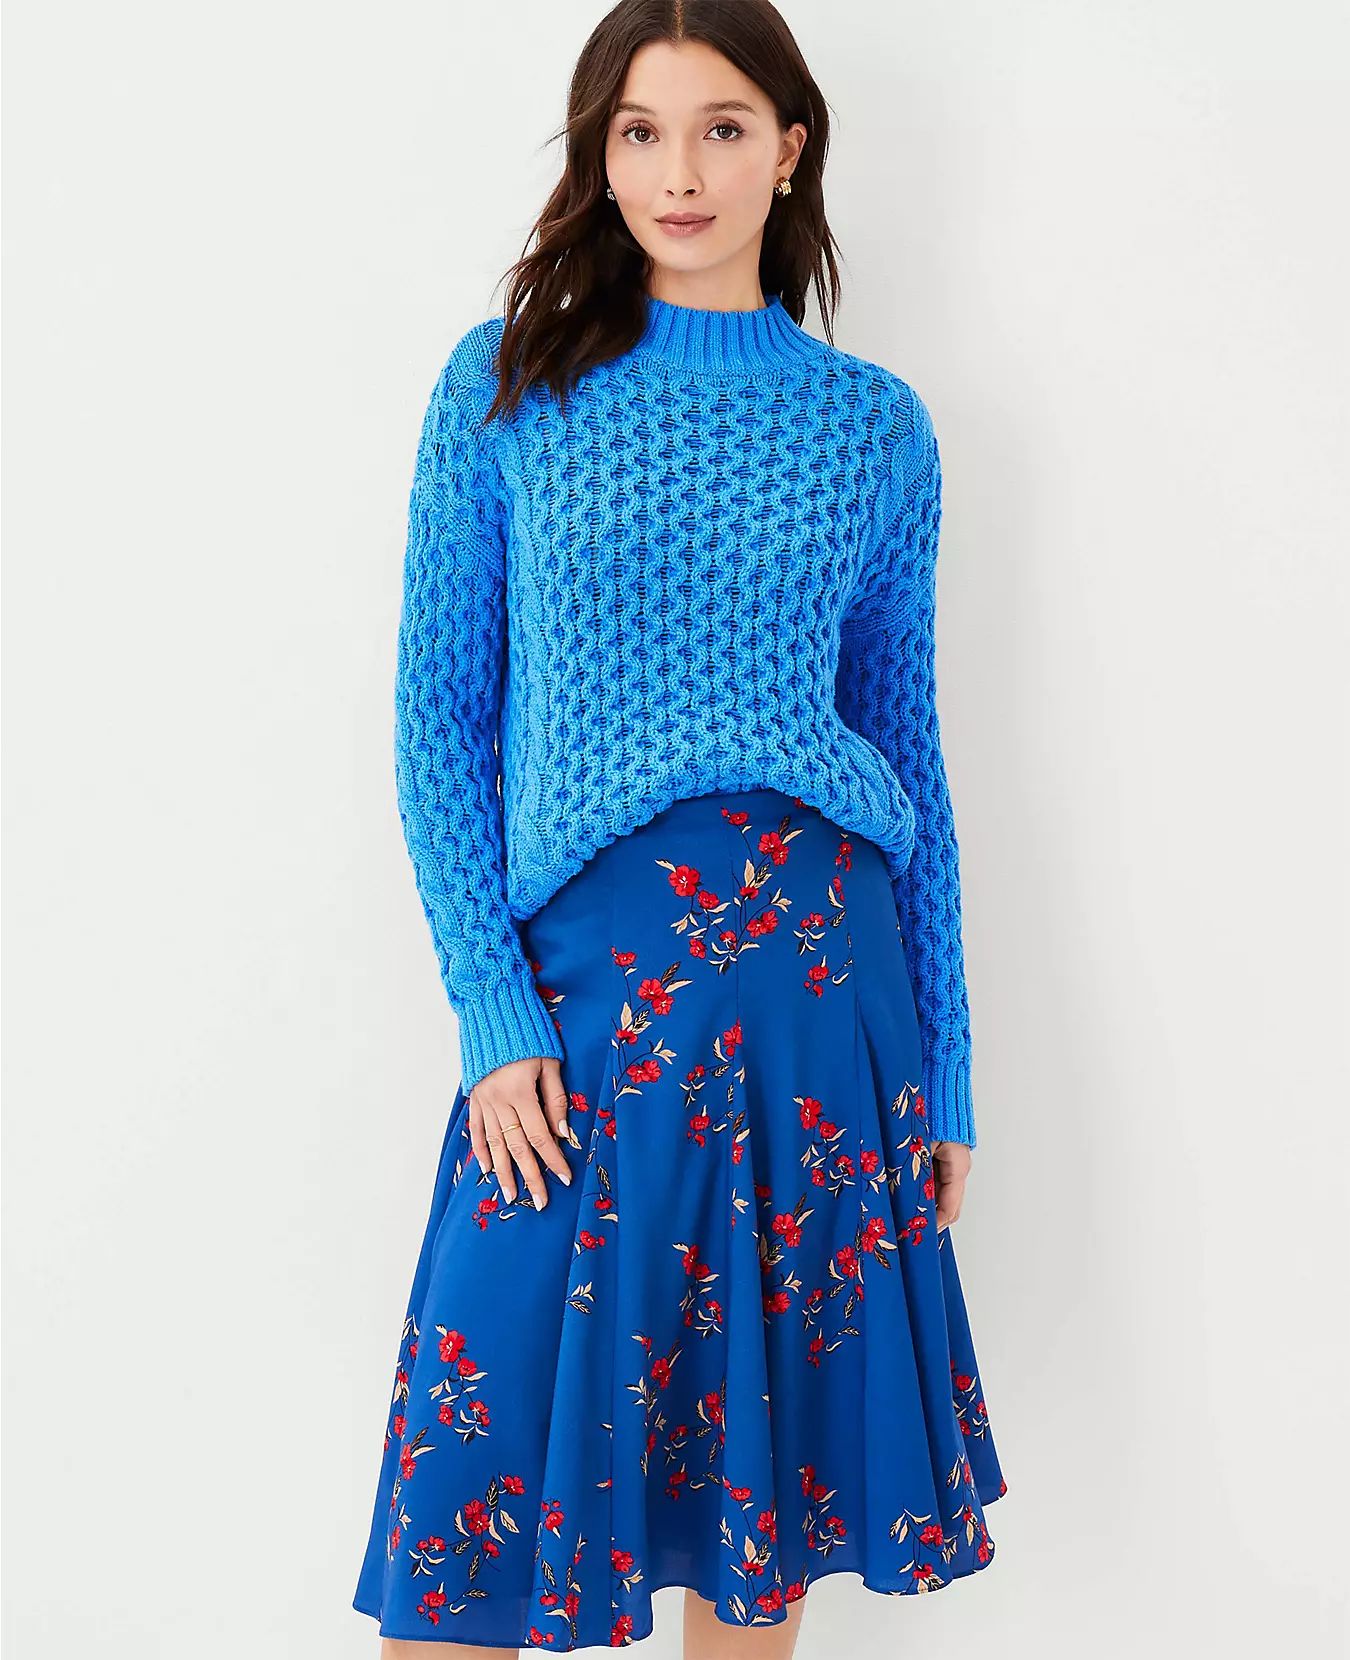 Honeycomb Cable Sweater | Ann Taylor (US)